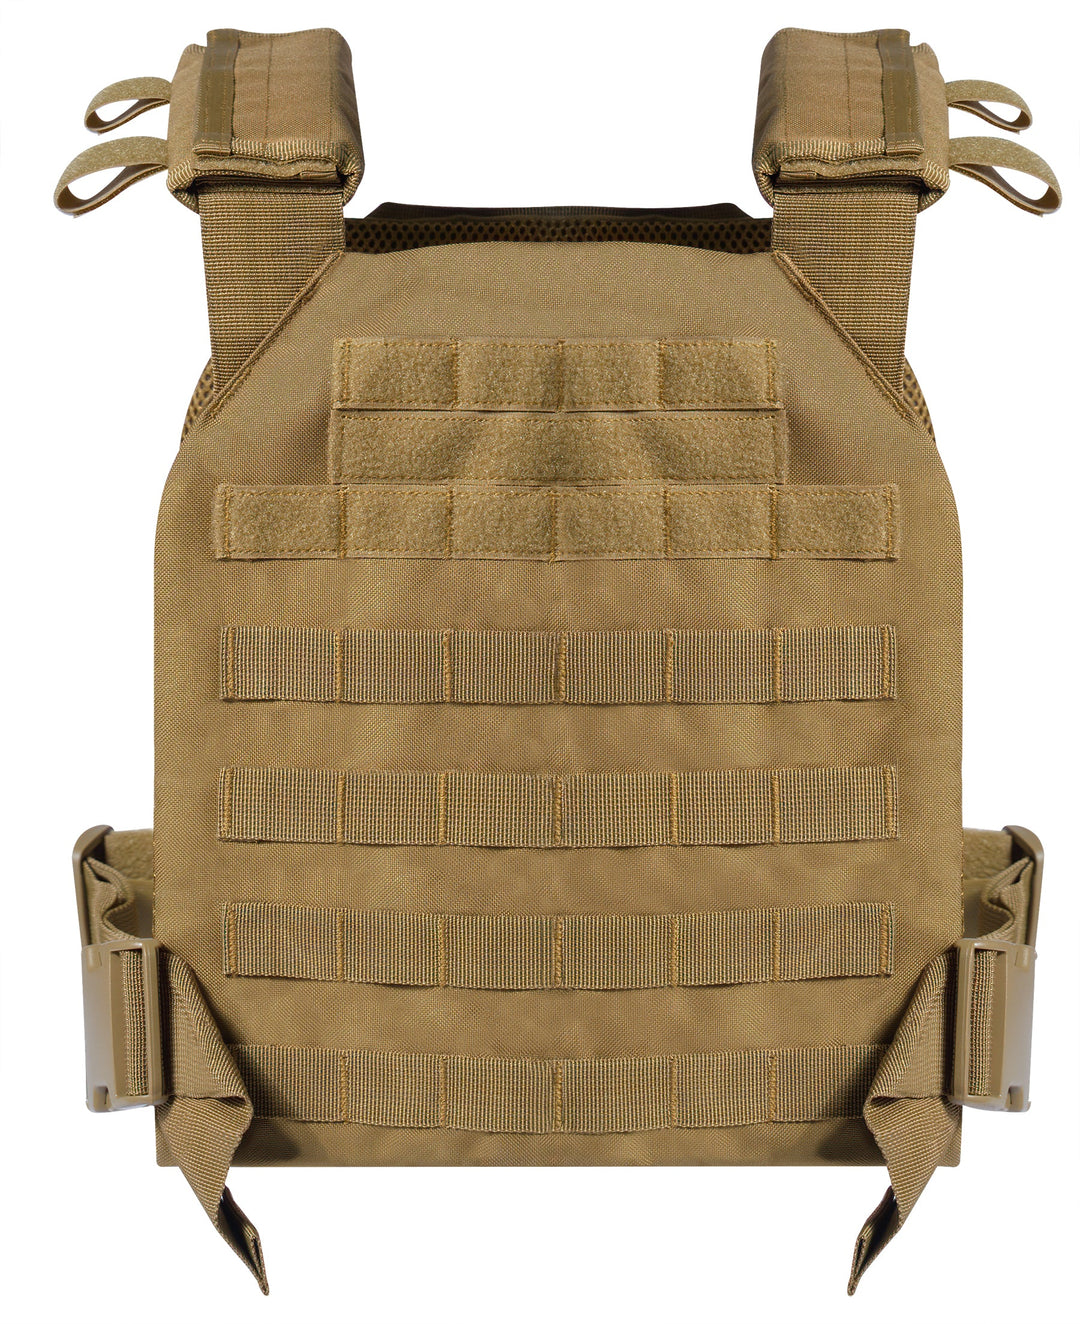 Low Profile Plate Carrier Vest by Rothco